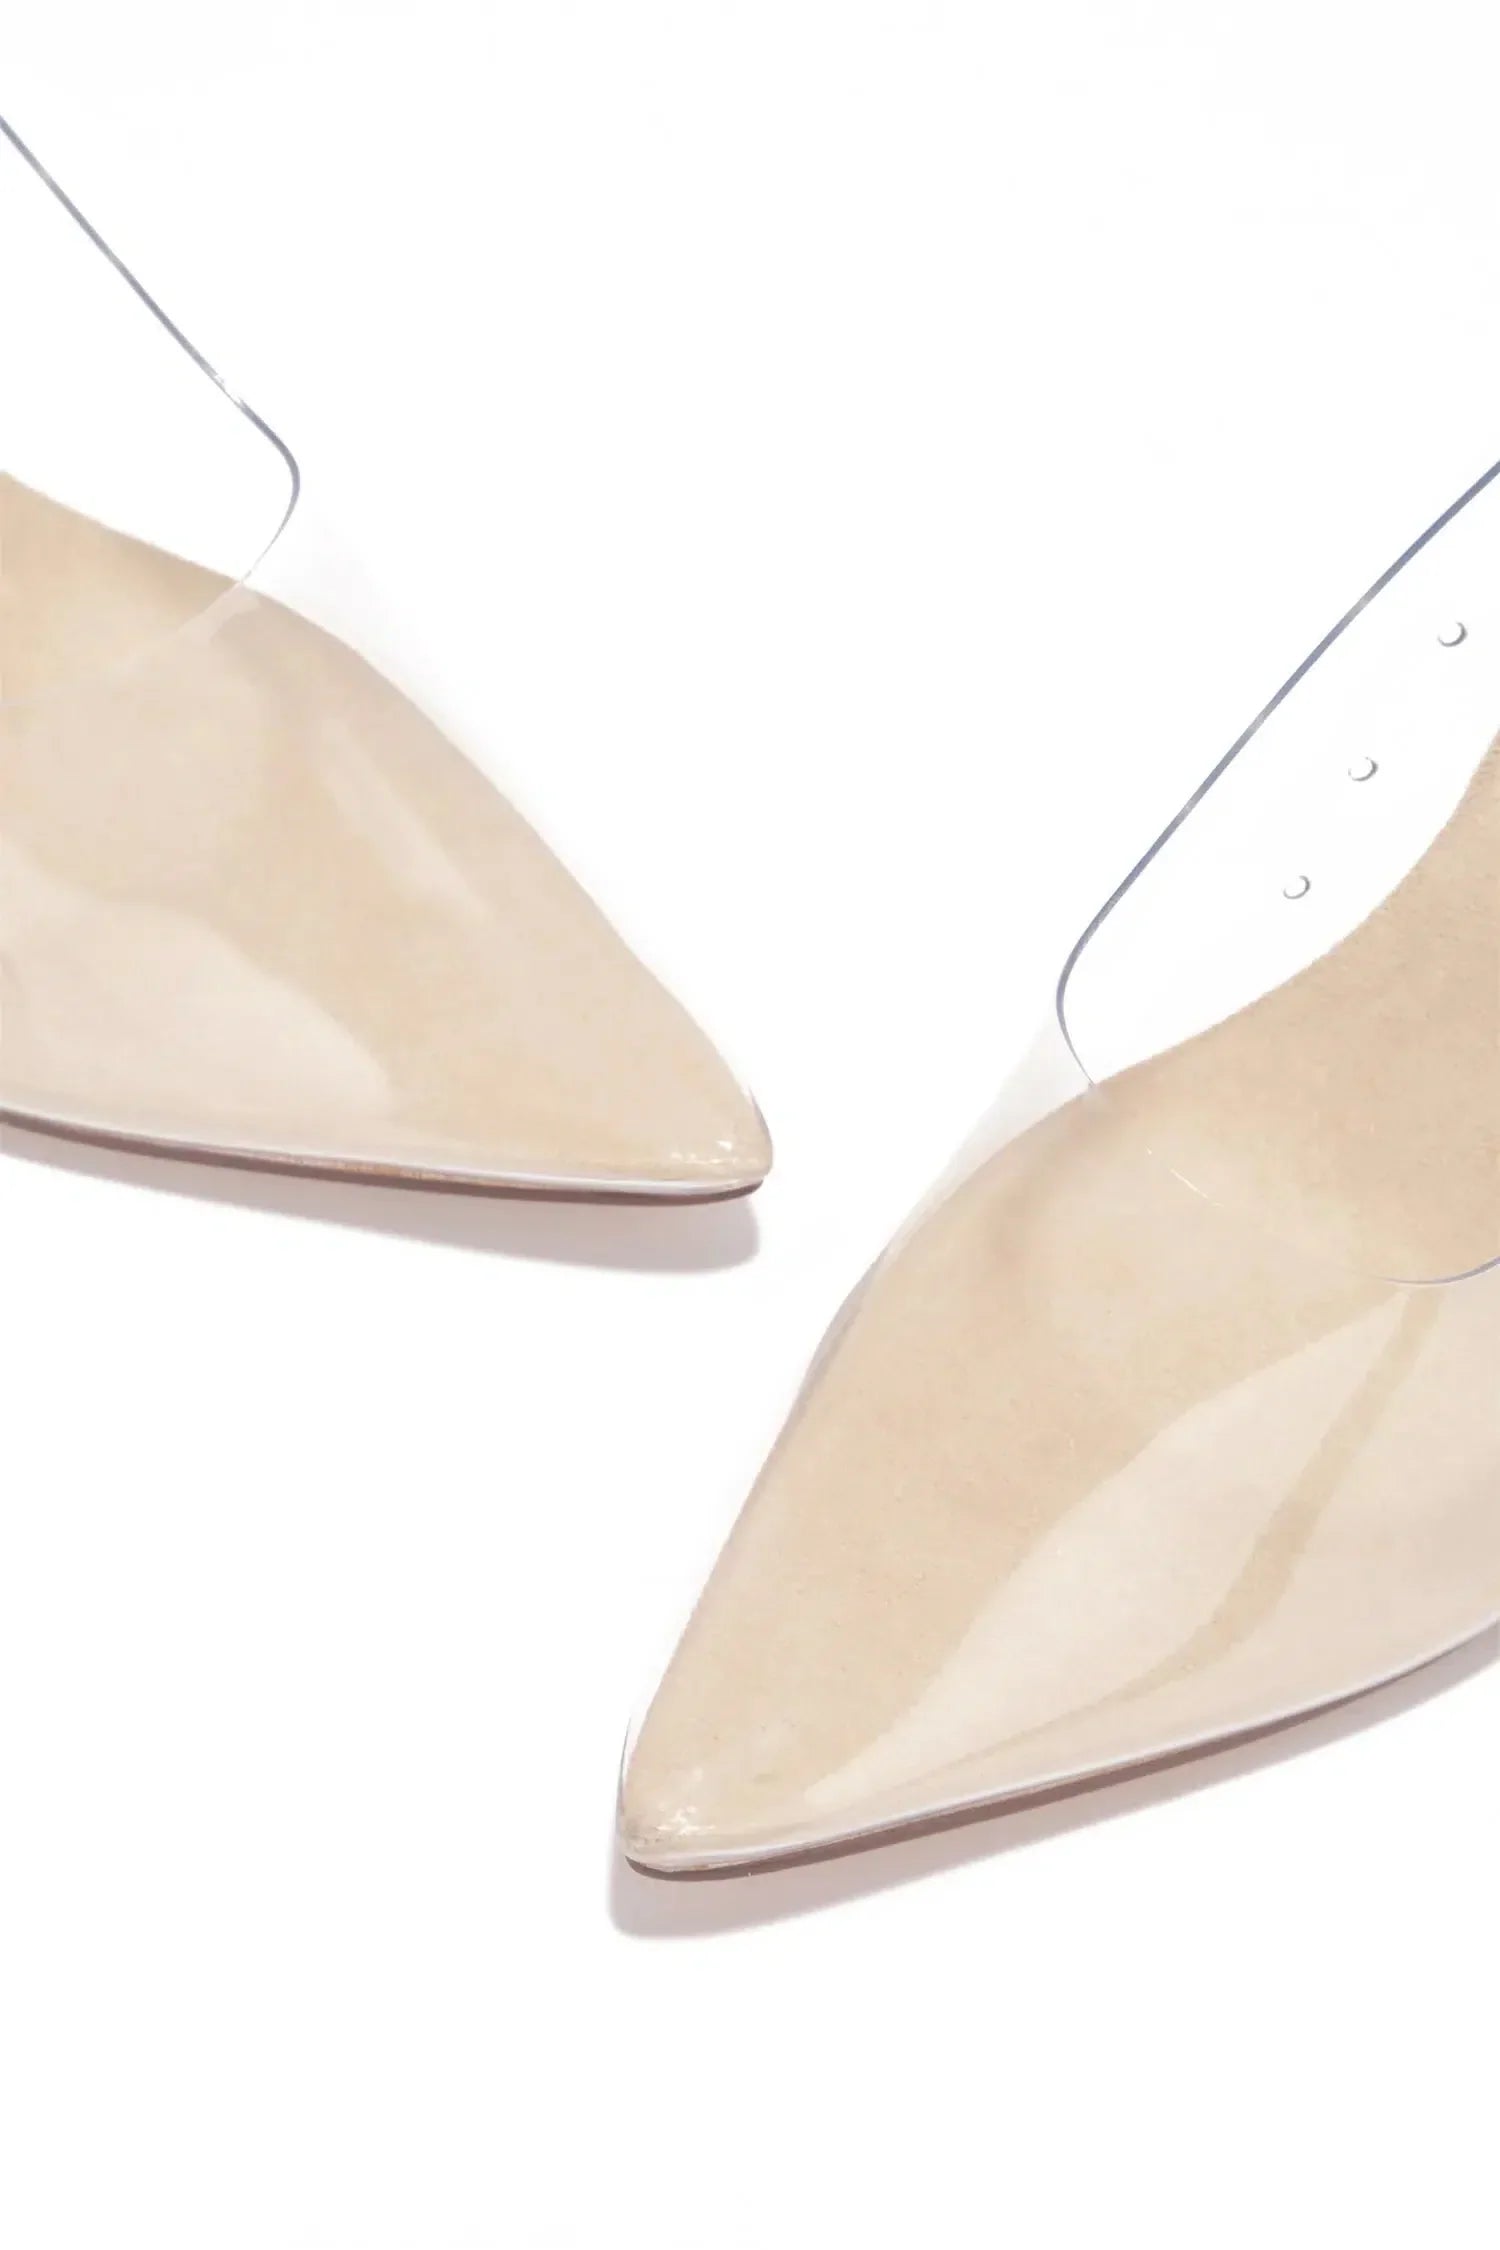 Sashay Clear Classic Pumps - SASHAY COUTURE BOUTIQUE Shoes